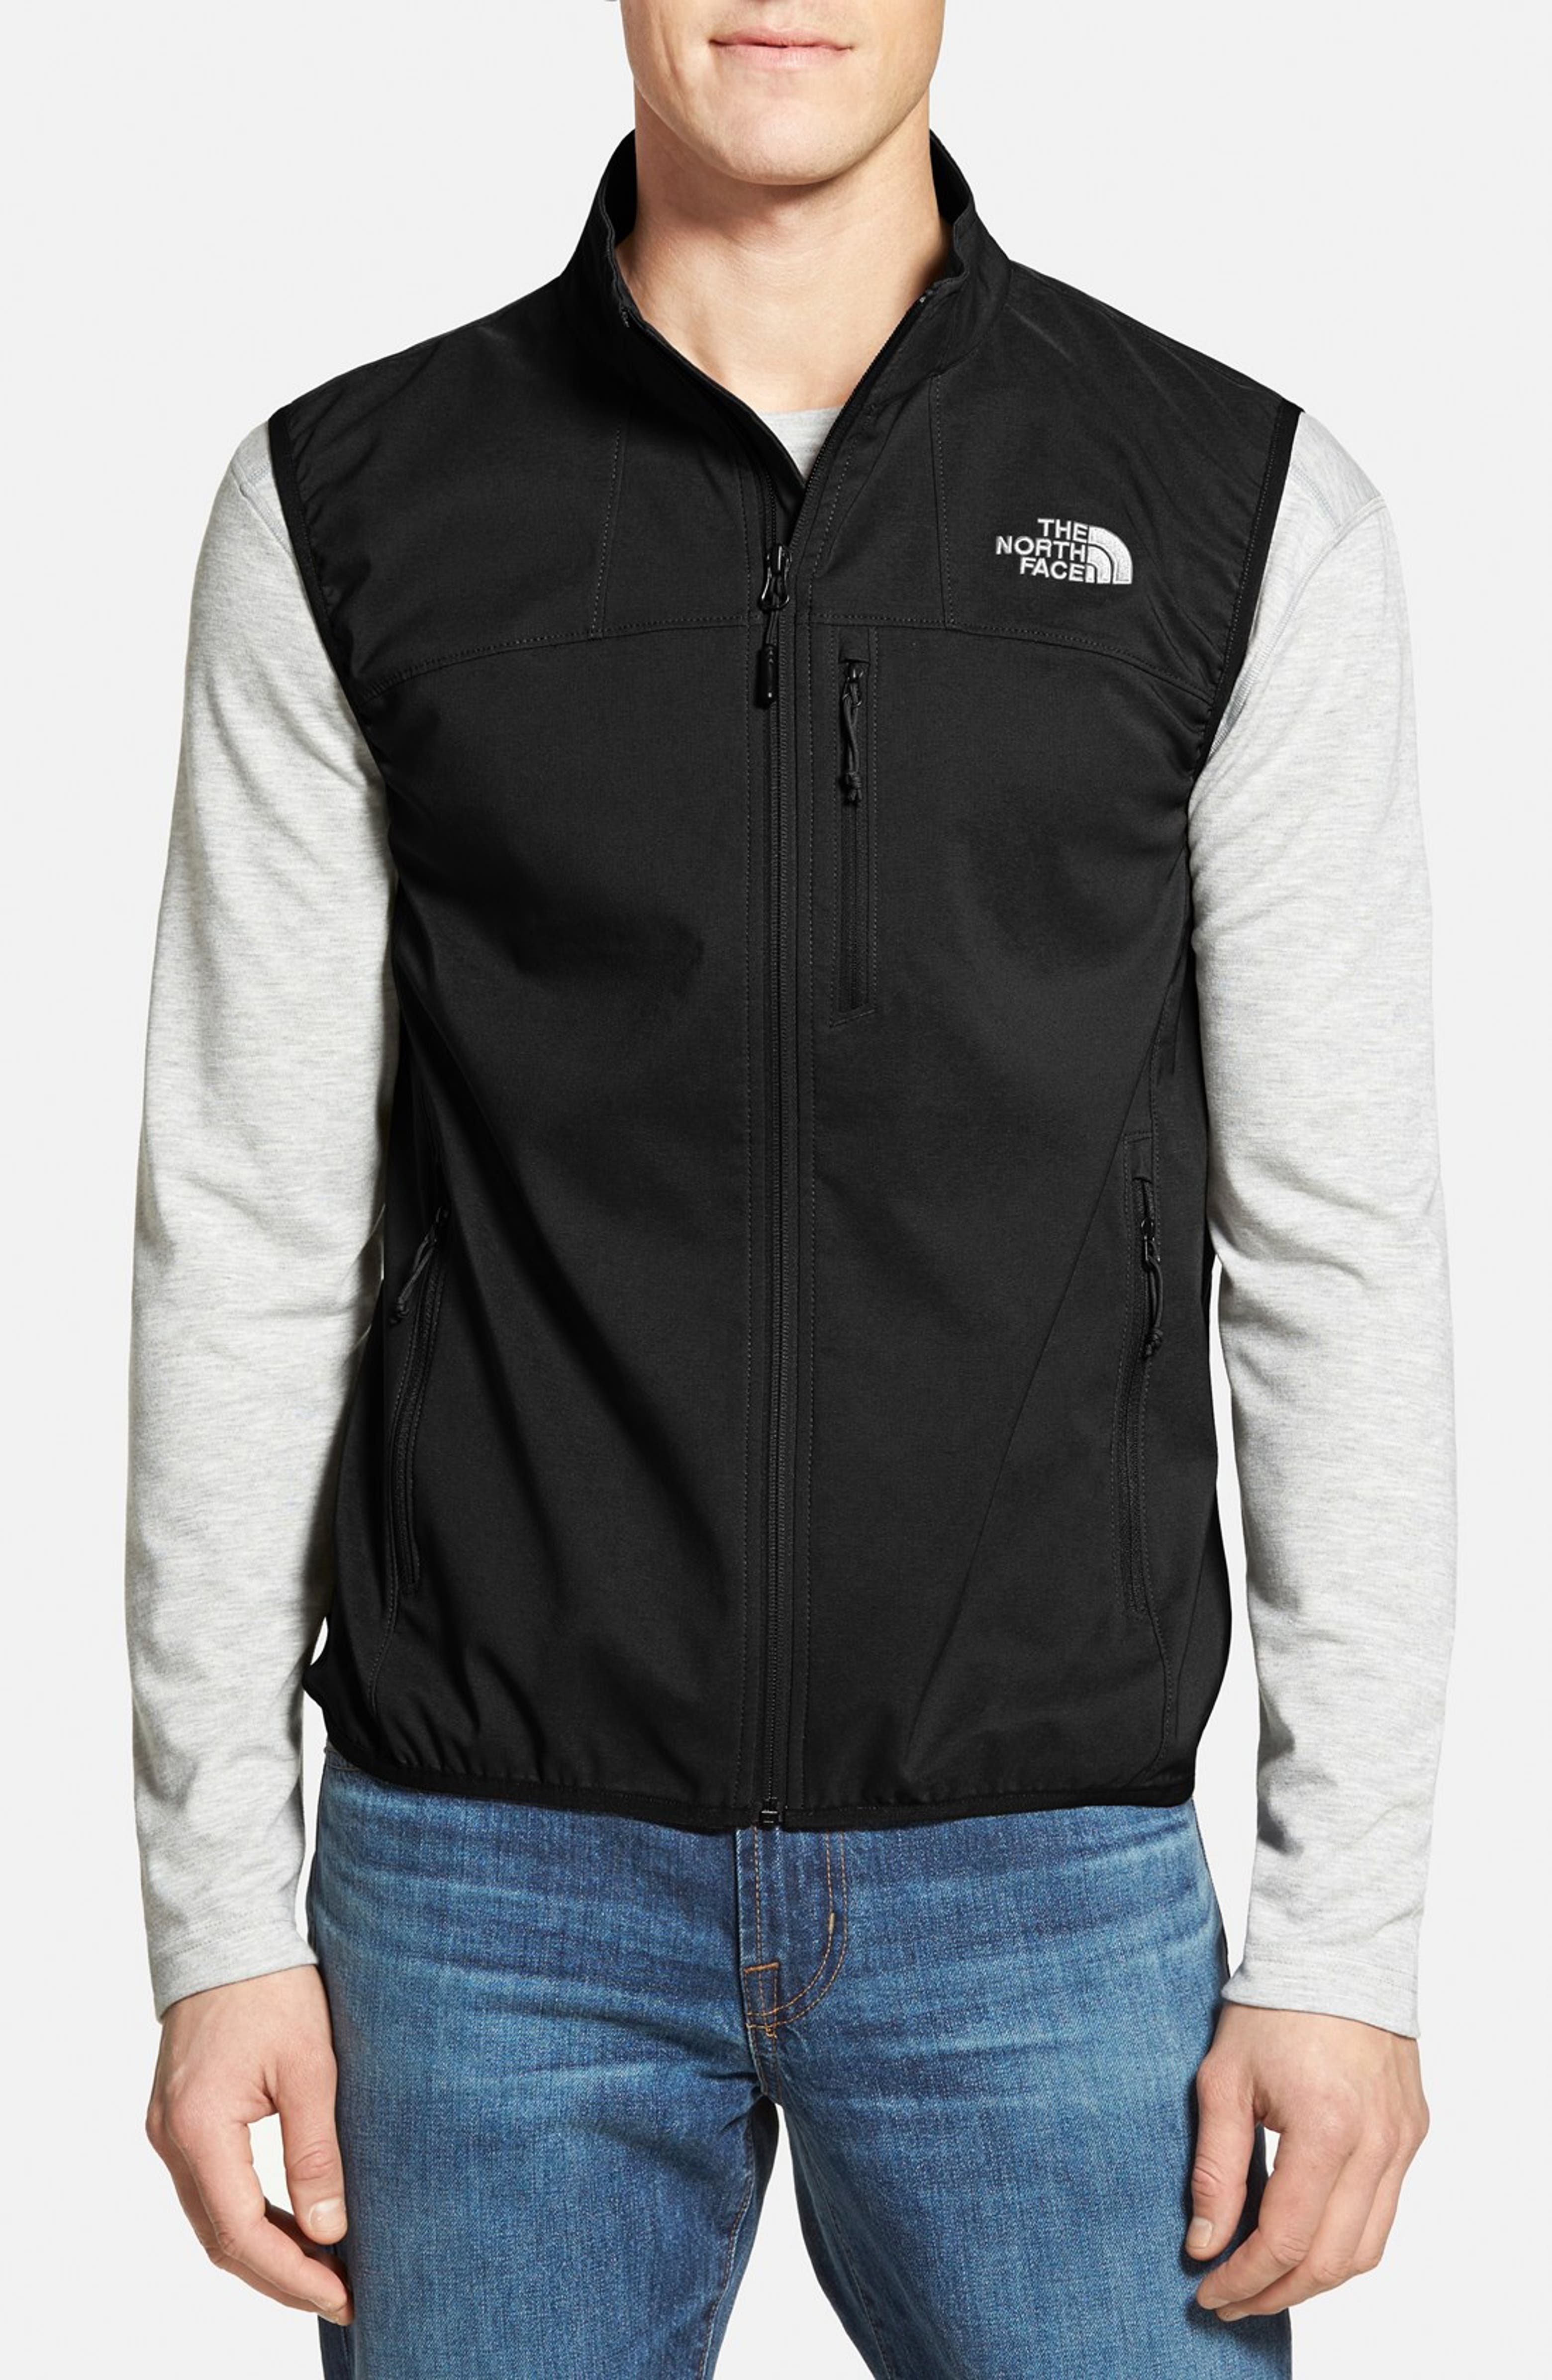 The North Face 'Nimble' Wind Resistant & Water Repellent Vest | Nordstrom